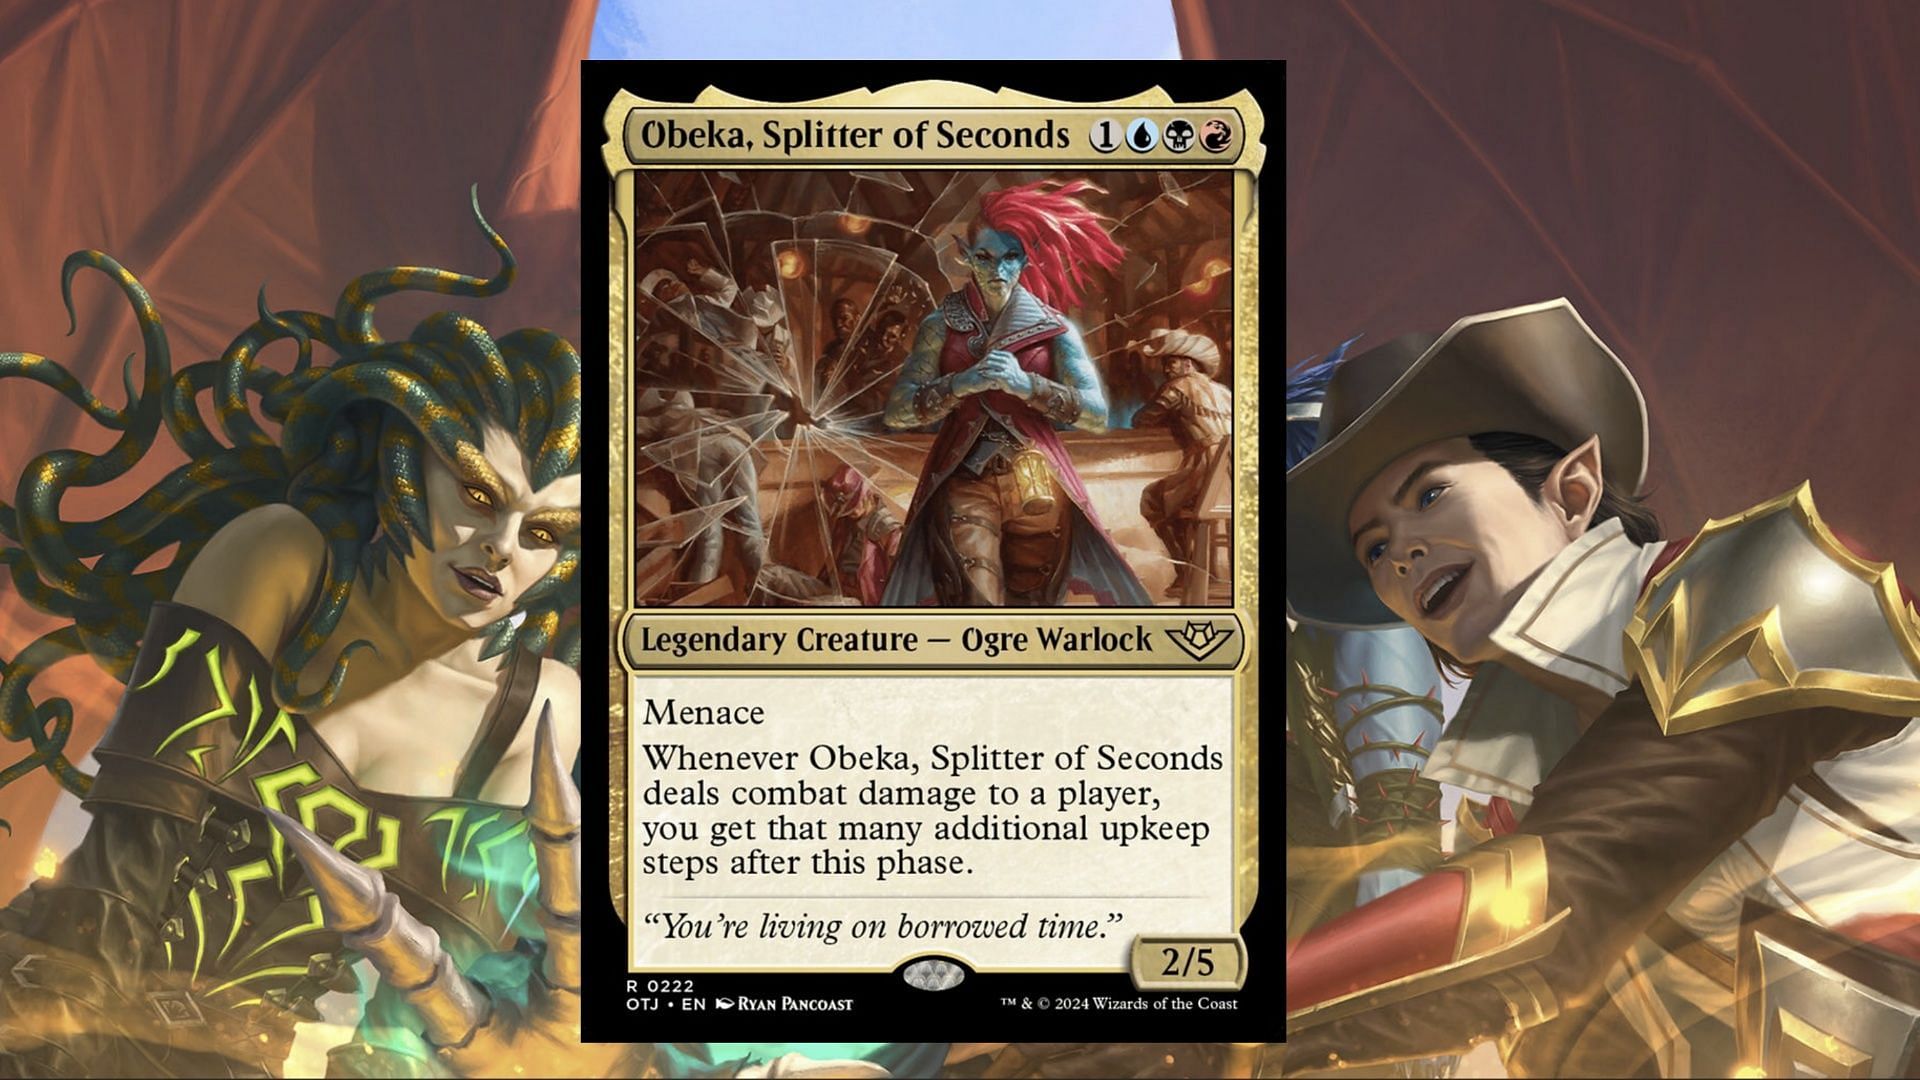 Obeka, Splitter of Seconds in Magic: The Gathering (Image via Wizards of the Coast)